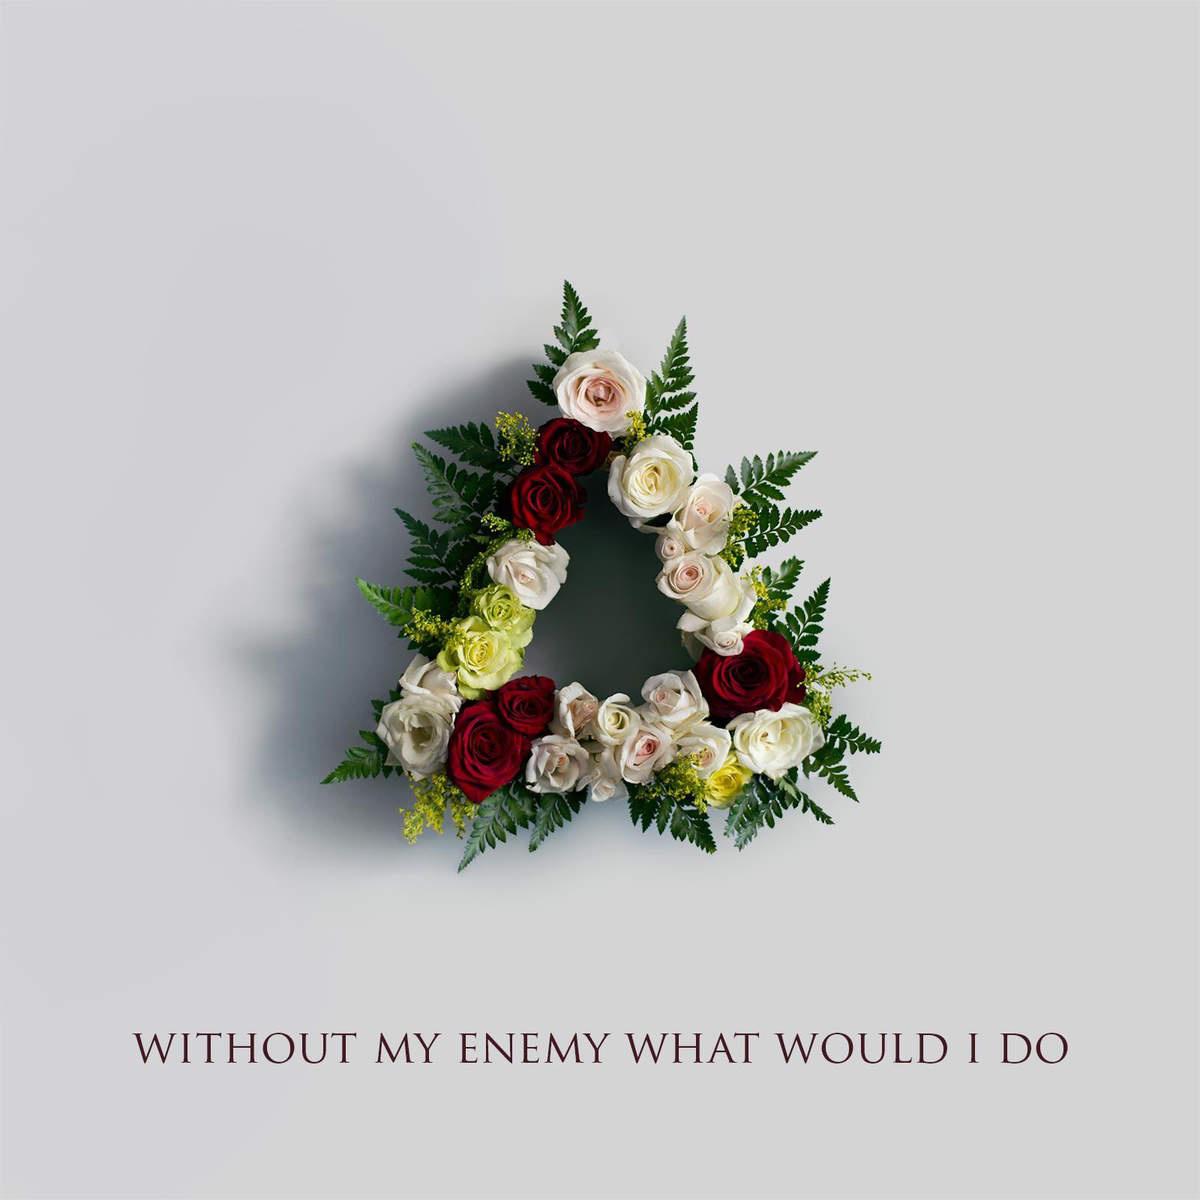 Cry歌词 歌手MADE IN HEIGHTS-专辑Without My Enemy What Would I Do-单曲《Cry》LRC歌词下载